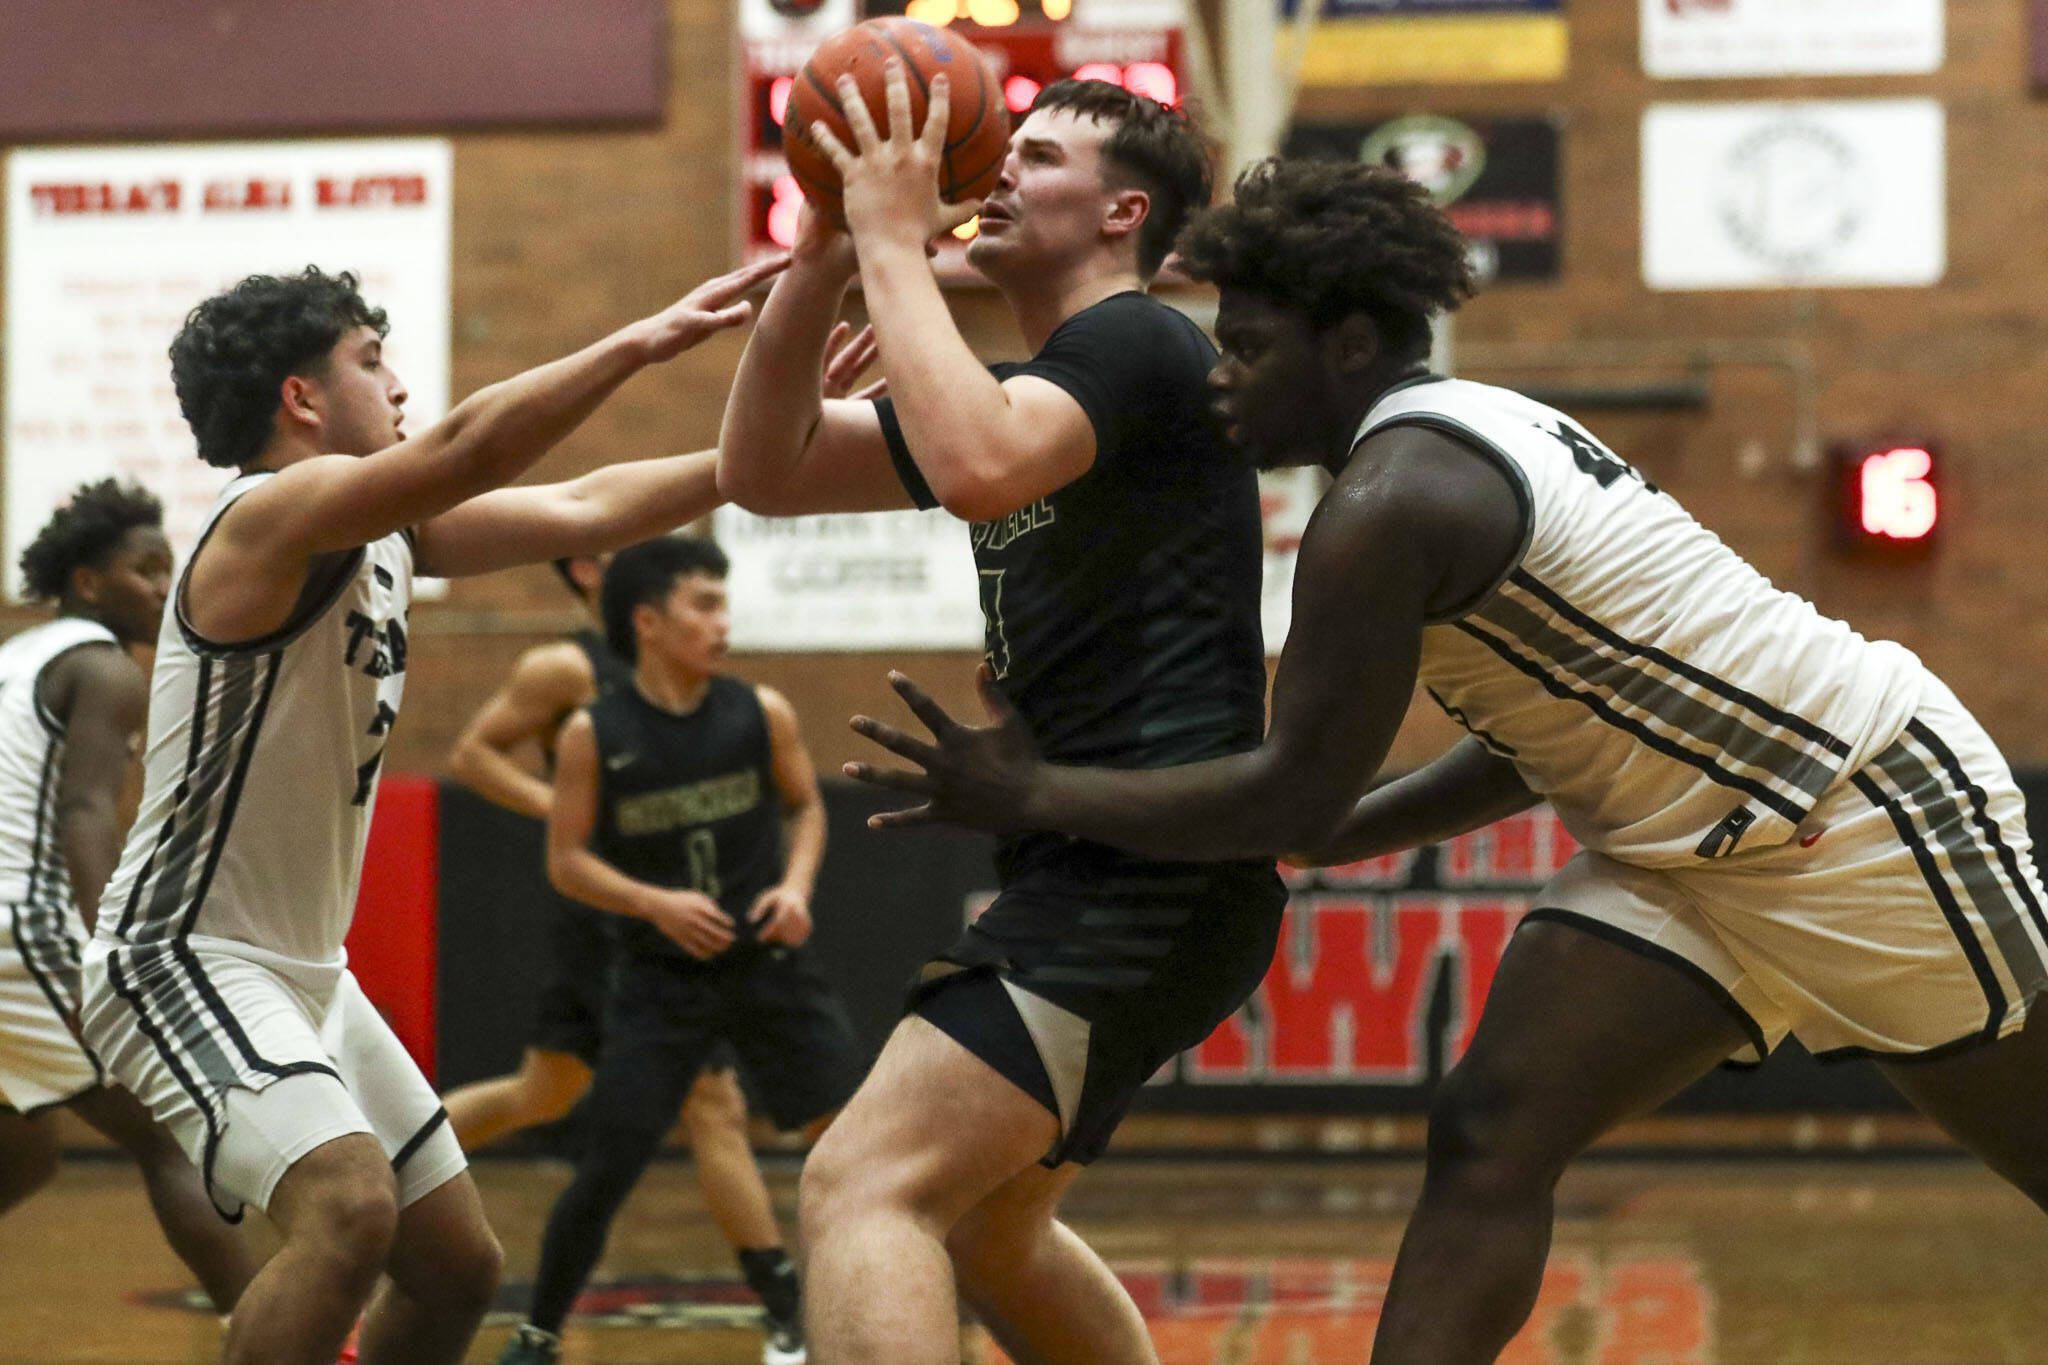 Marysville Getchell’s Wyatt Harris (4) moves witht the ball during a boys basketball game between Mountlake Terrace and Marysville-Getchell at Mountlake Terrace High School in Mountlake Terrace, Washington on Friday, Dec. 8, 2023. Mountlake Terrace won, 58-56. (Annie Barker / The Herald)